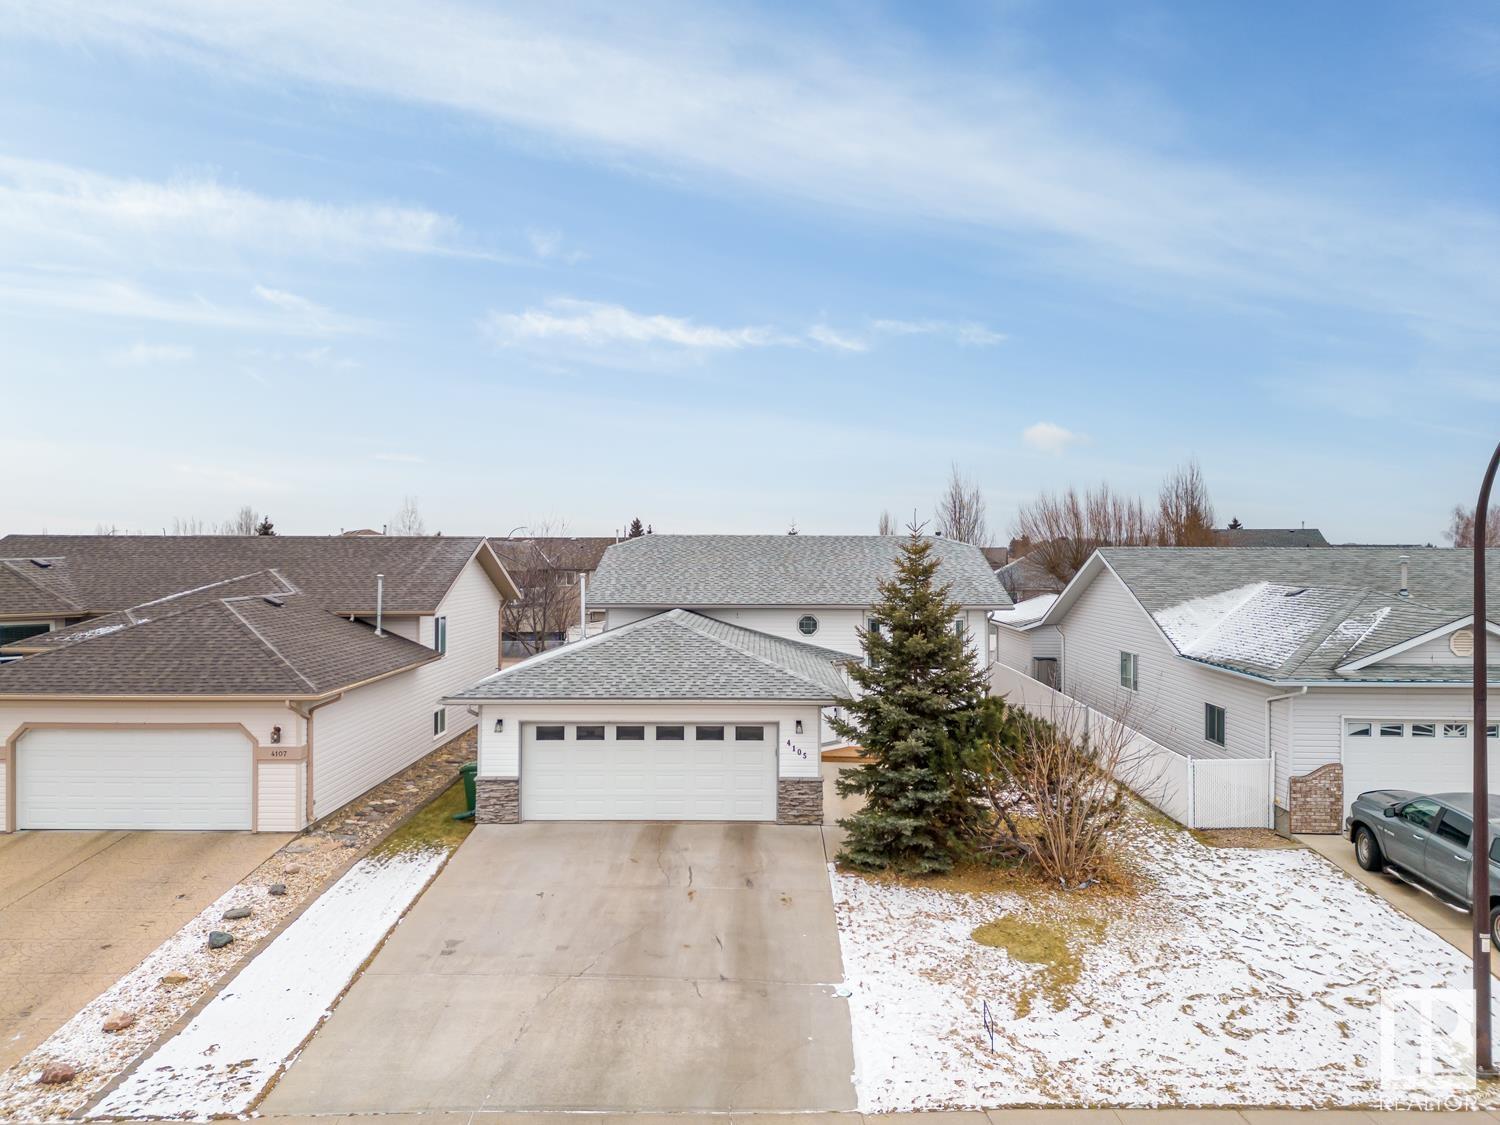 4105 39A ST located in Bonnyville Town, Alberta